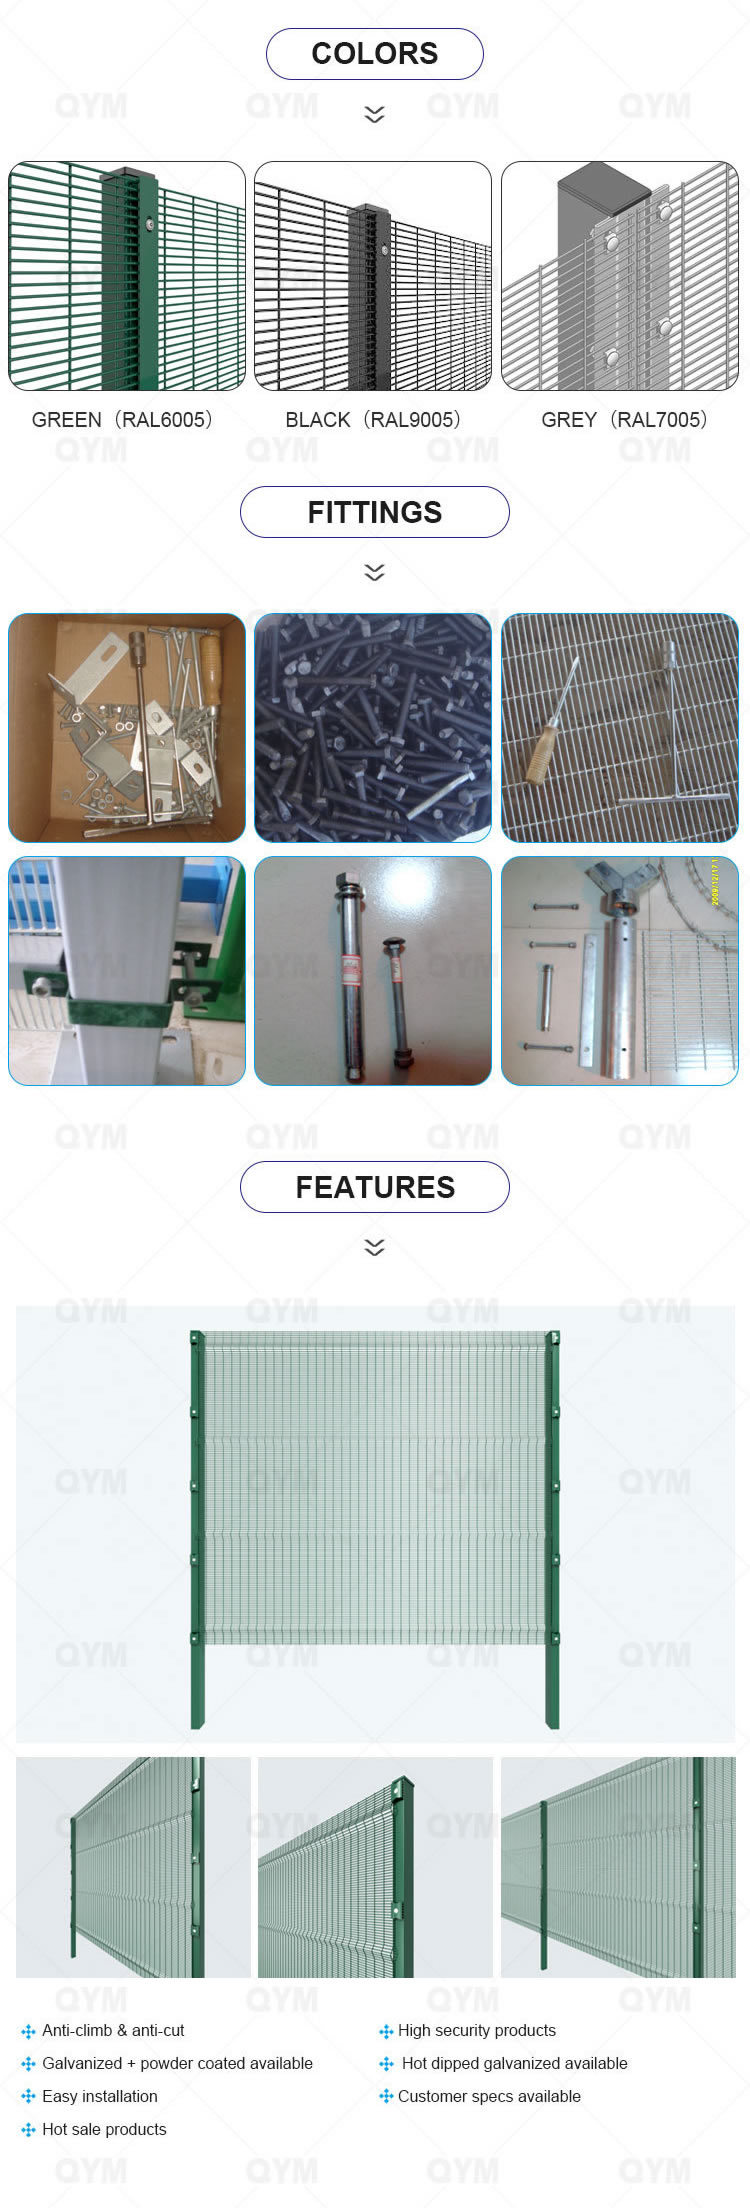 High Security 358 Fence Welded Wire Mesh Fencing